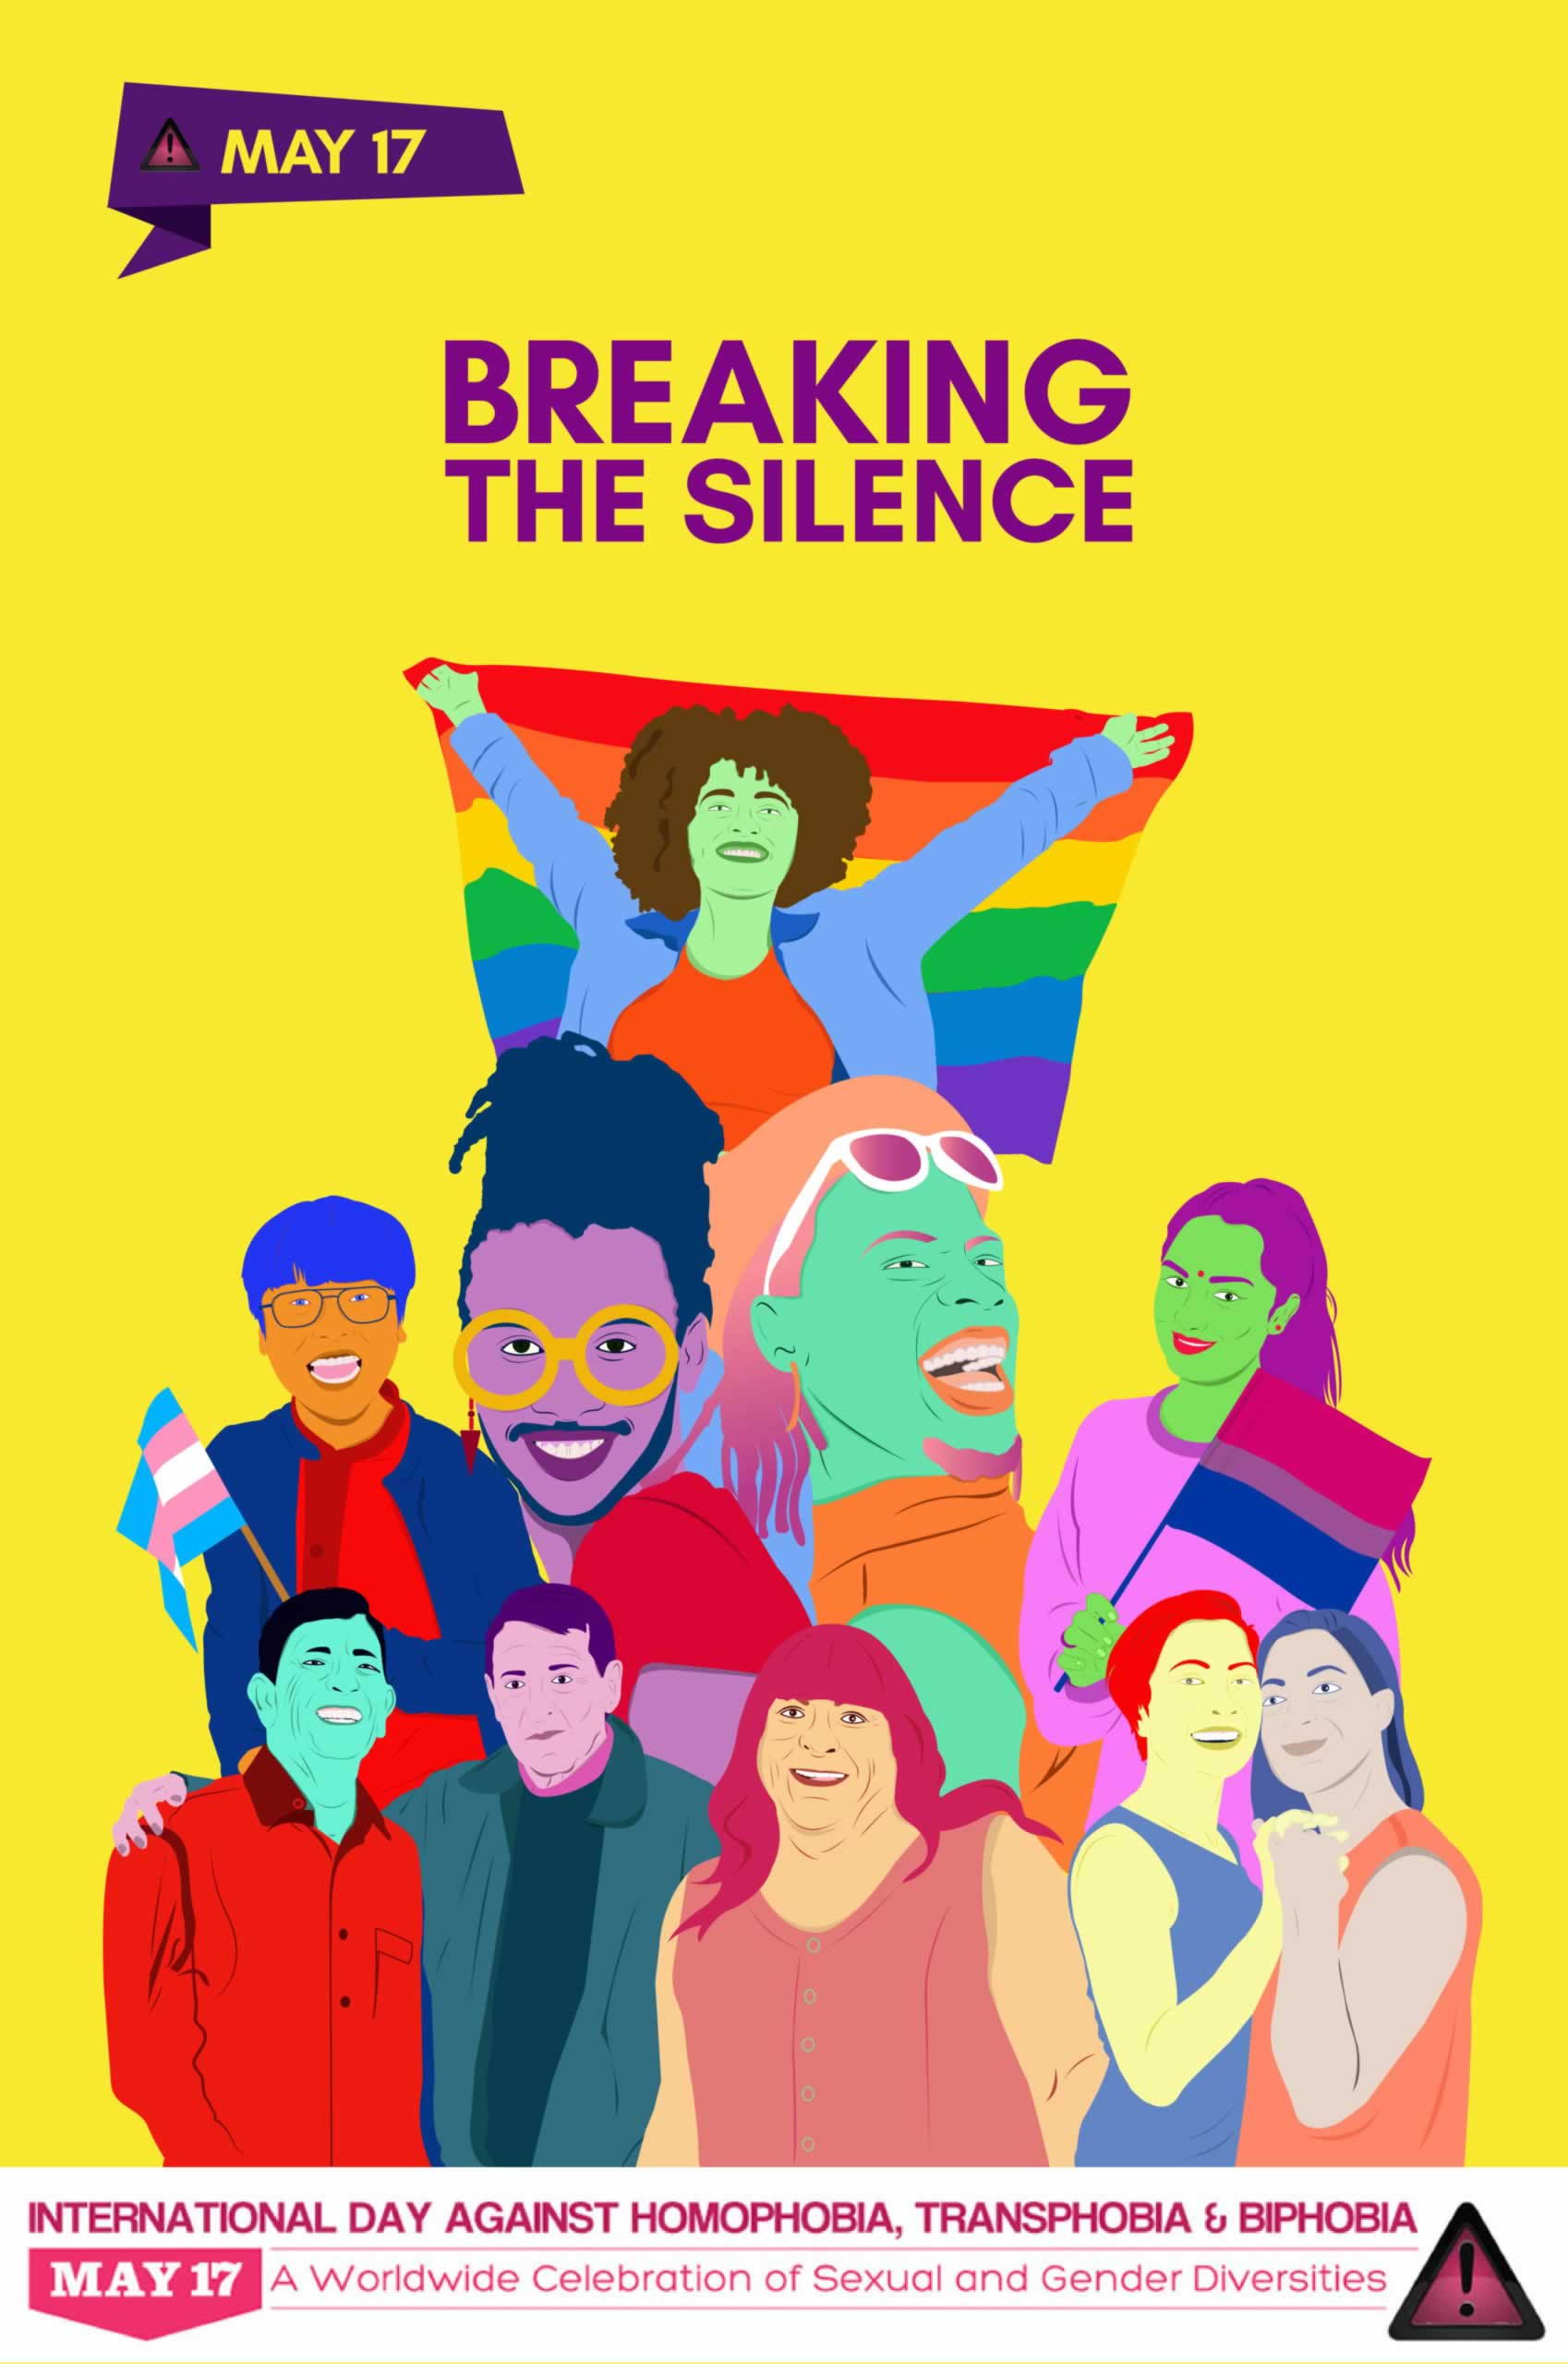 International Day against Homophobia, Transphobia and Biphobia: May 17 A worldwide celebration of Sexual and Gender Diversities